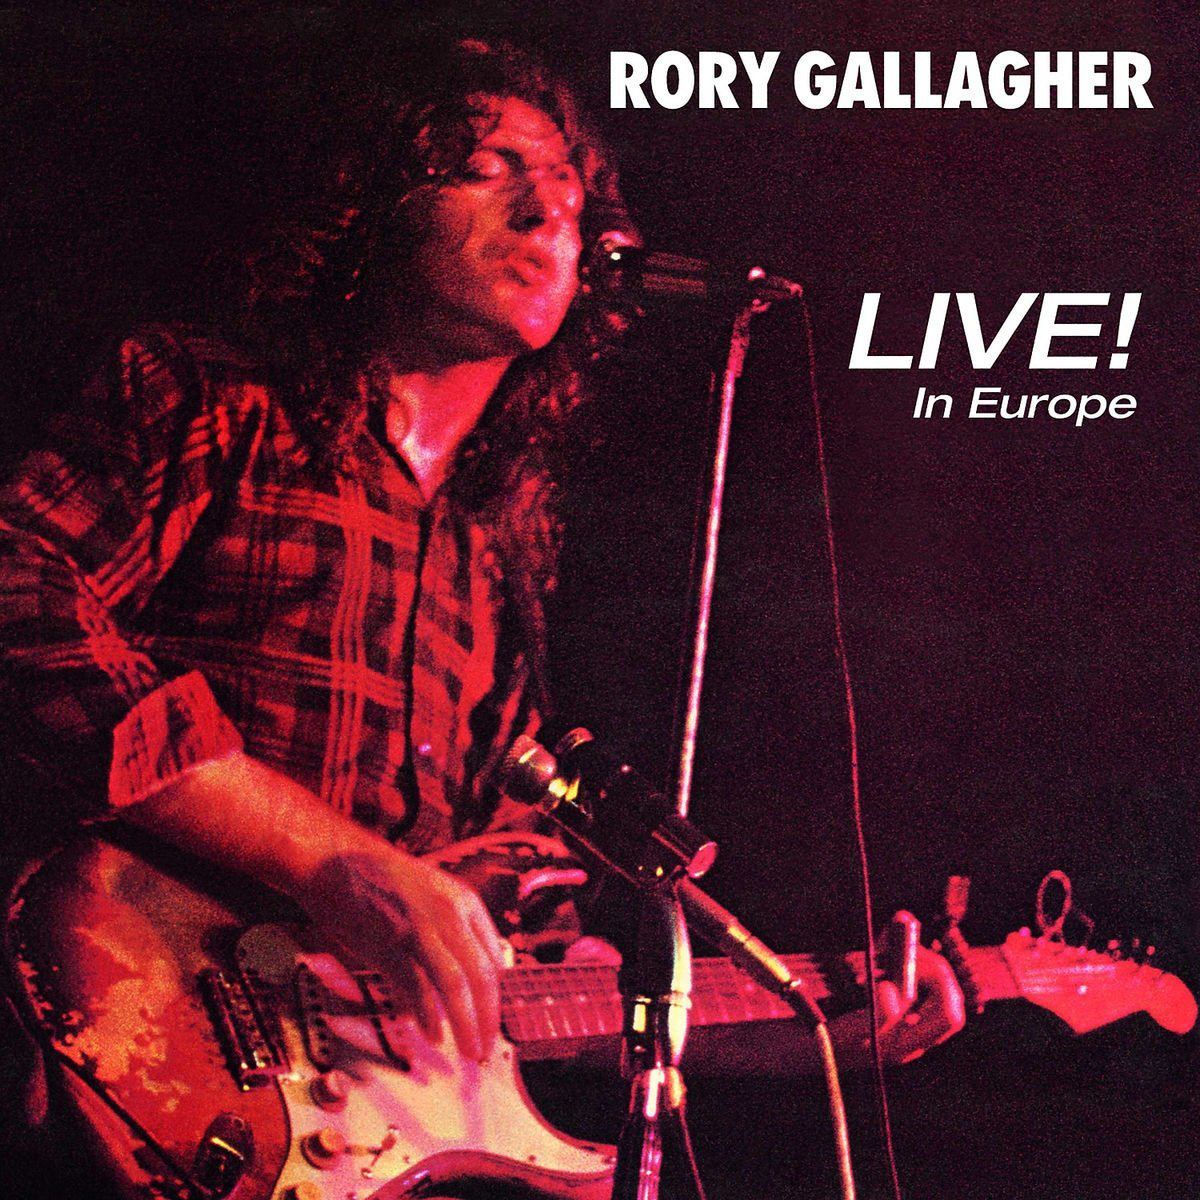 Rory Gallagher Live! In Europe (CD) Live / Remastered 2017 - Photo 1/1